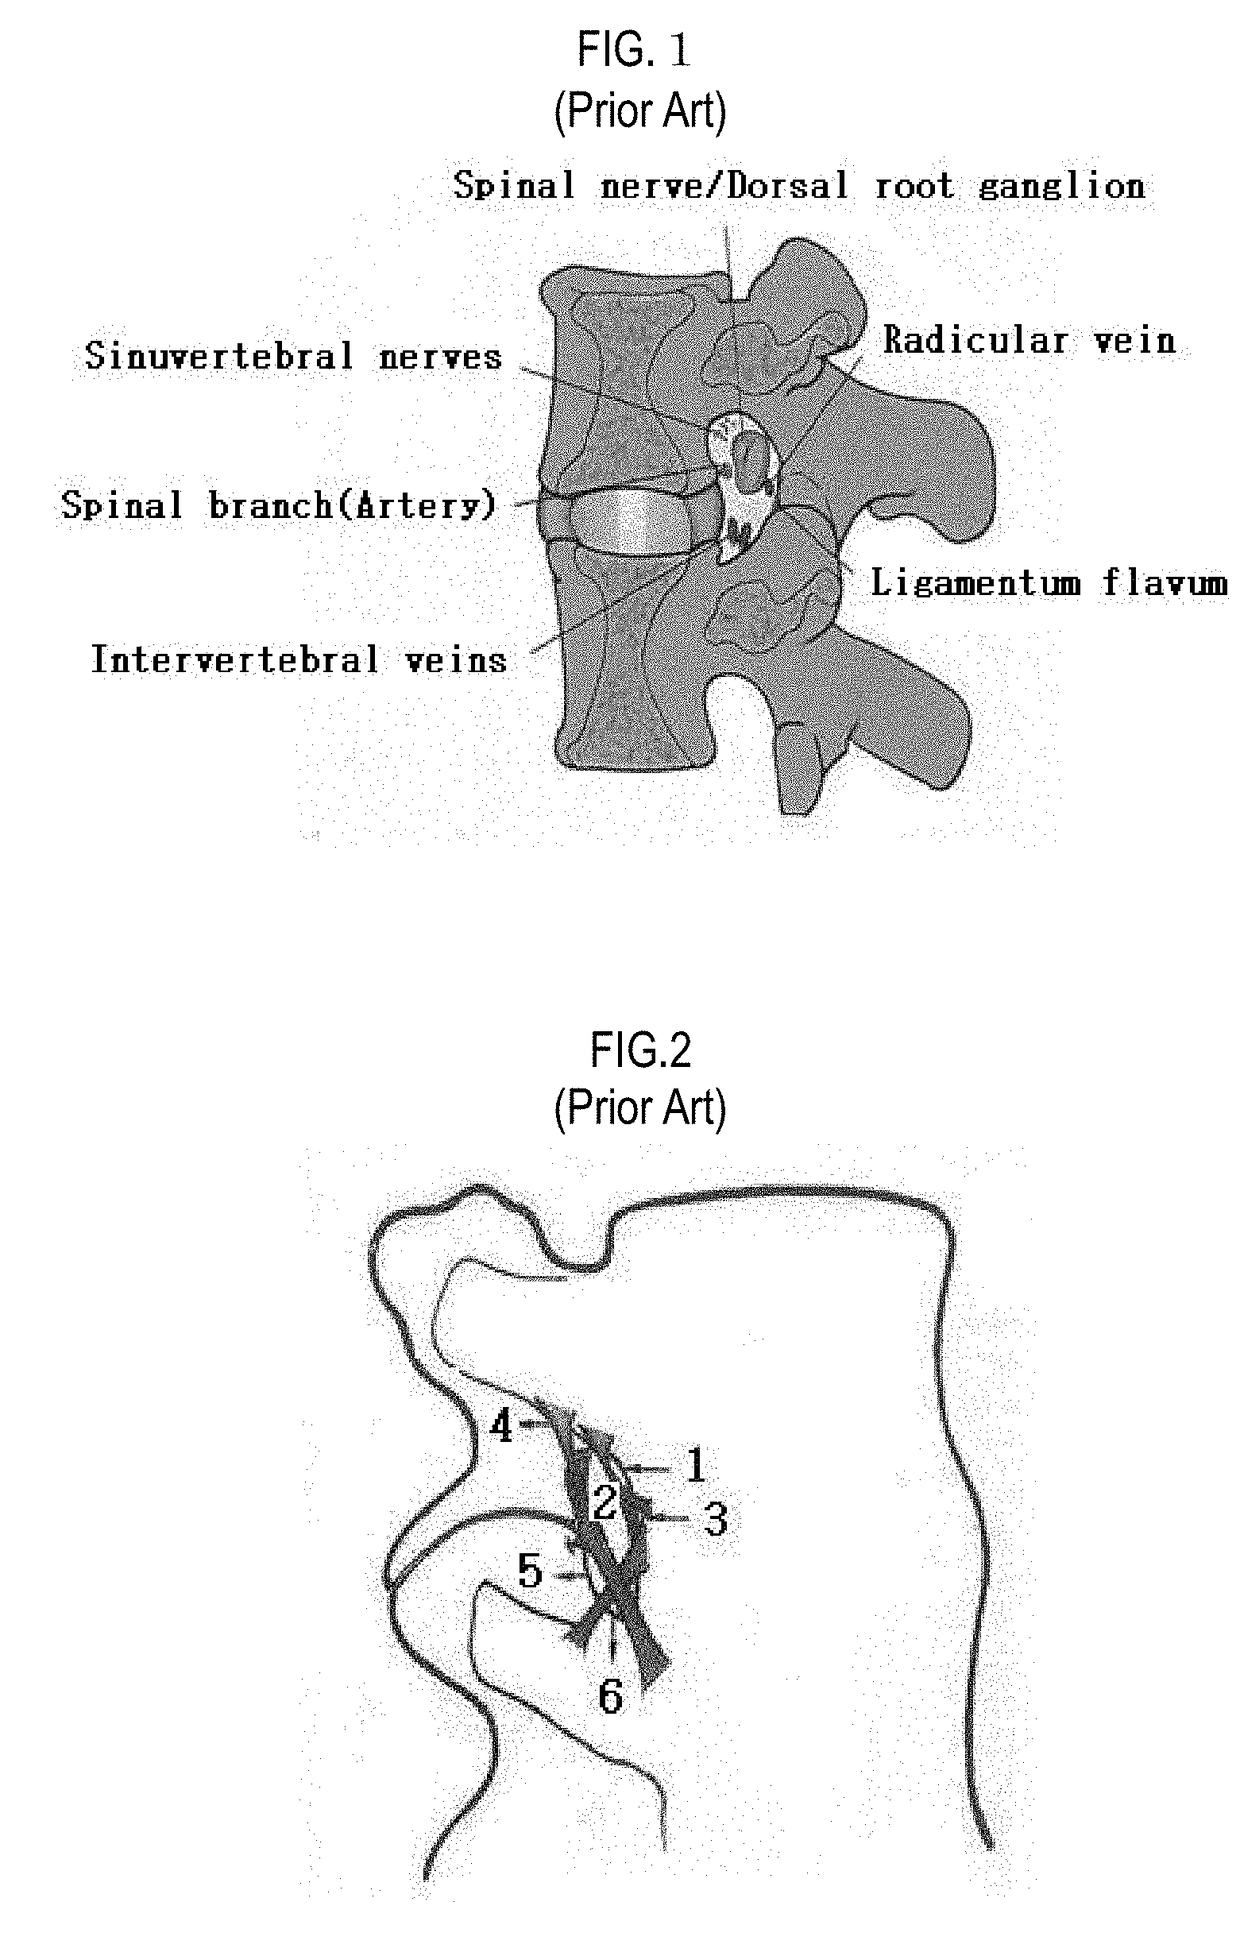 Instrument tools for performing percutaneous extraforaminotomy with foraminal ligament resection